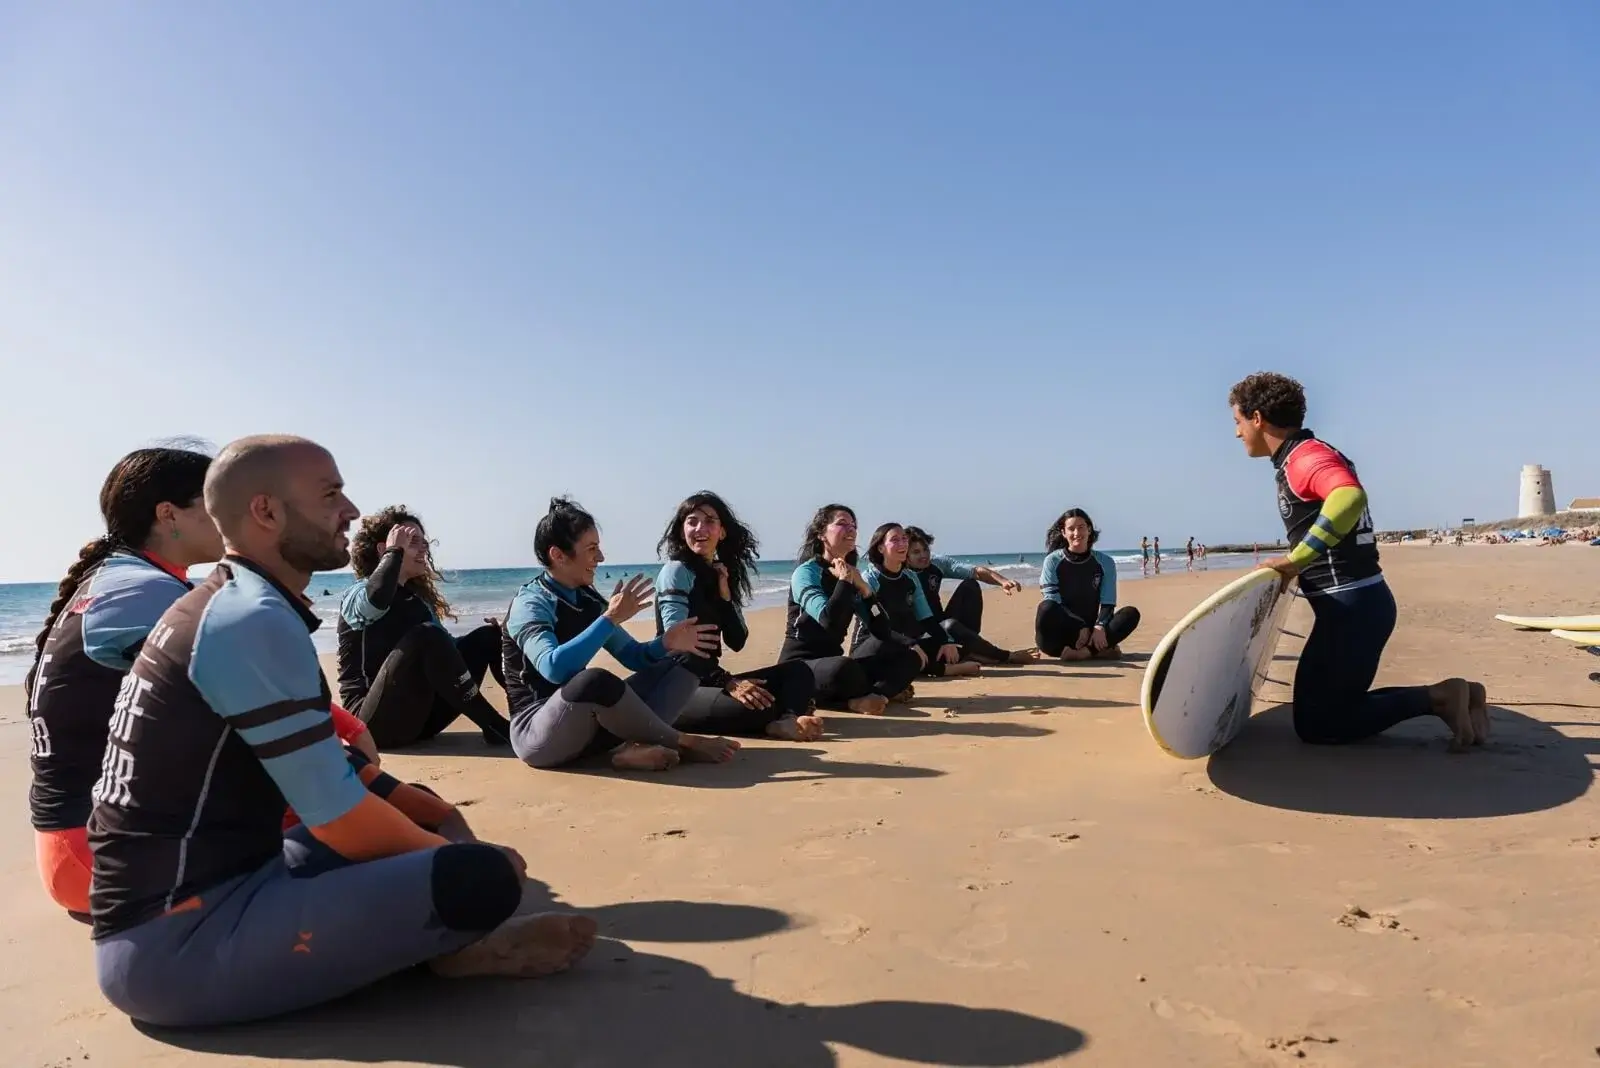 Surf camp in Conil, Cádiz Live the adventure at “Hurley Surf School”!🏄